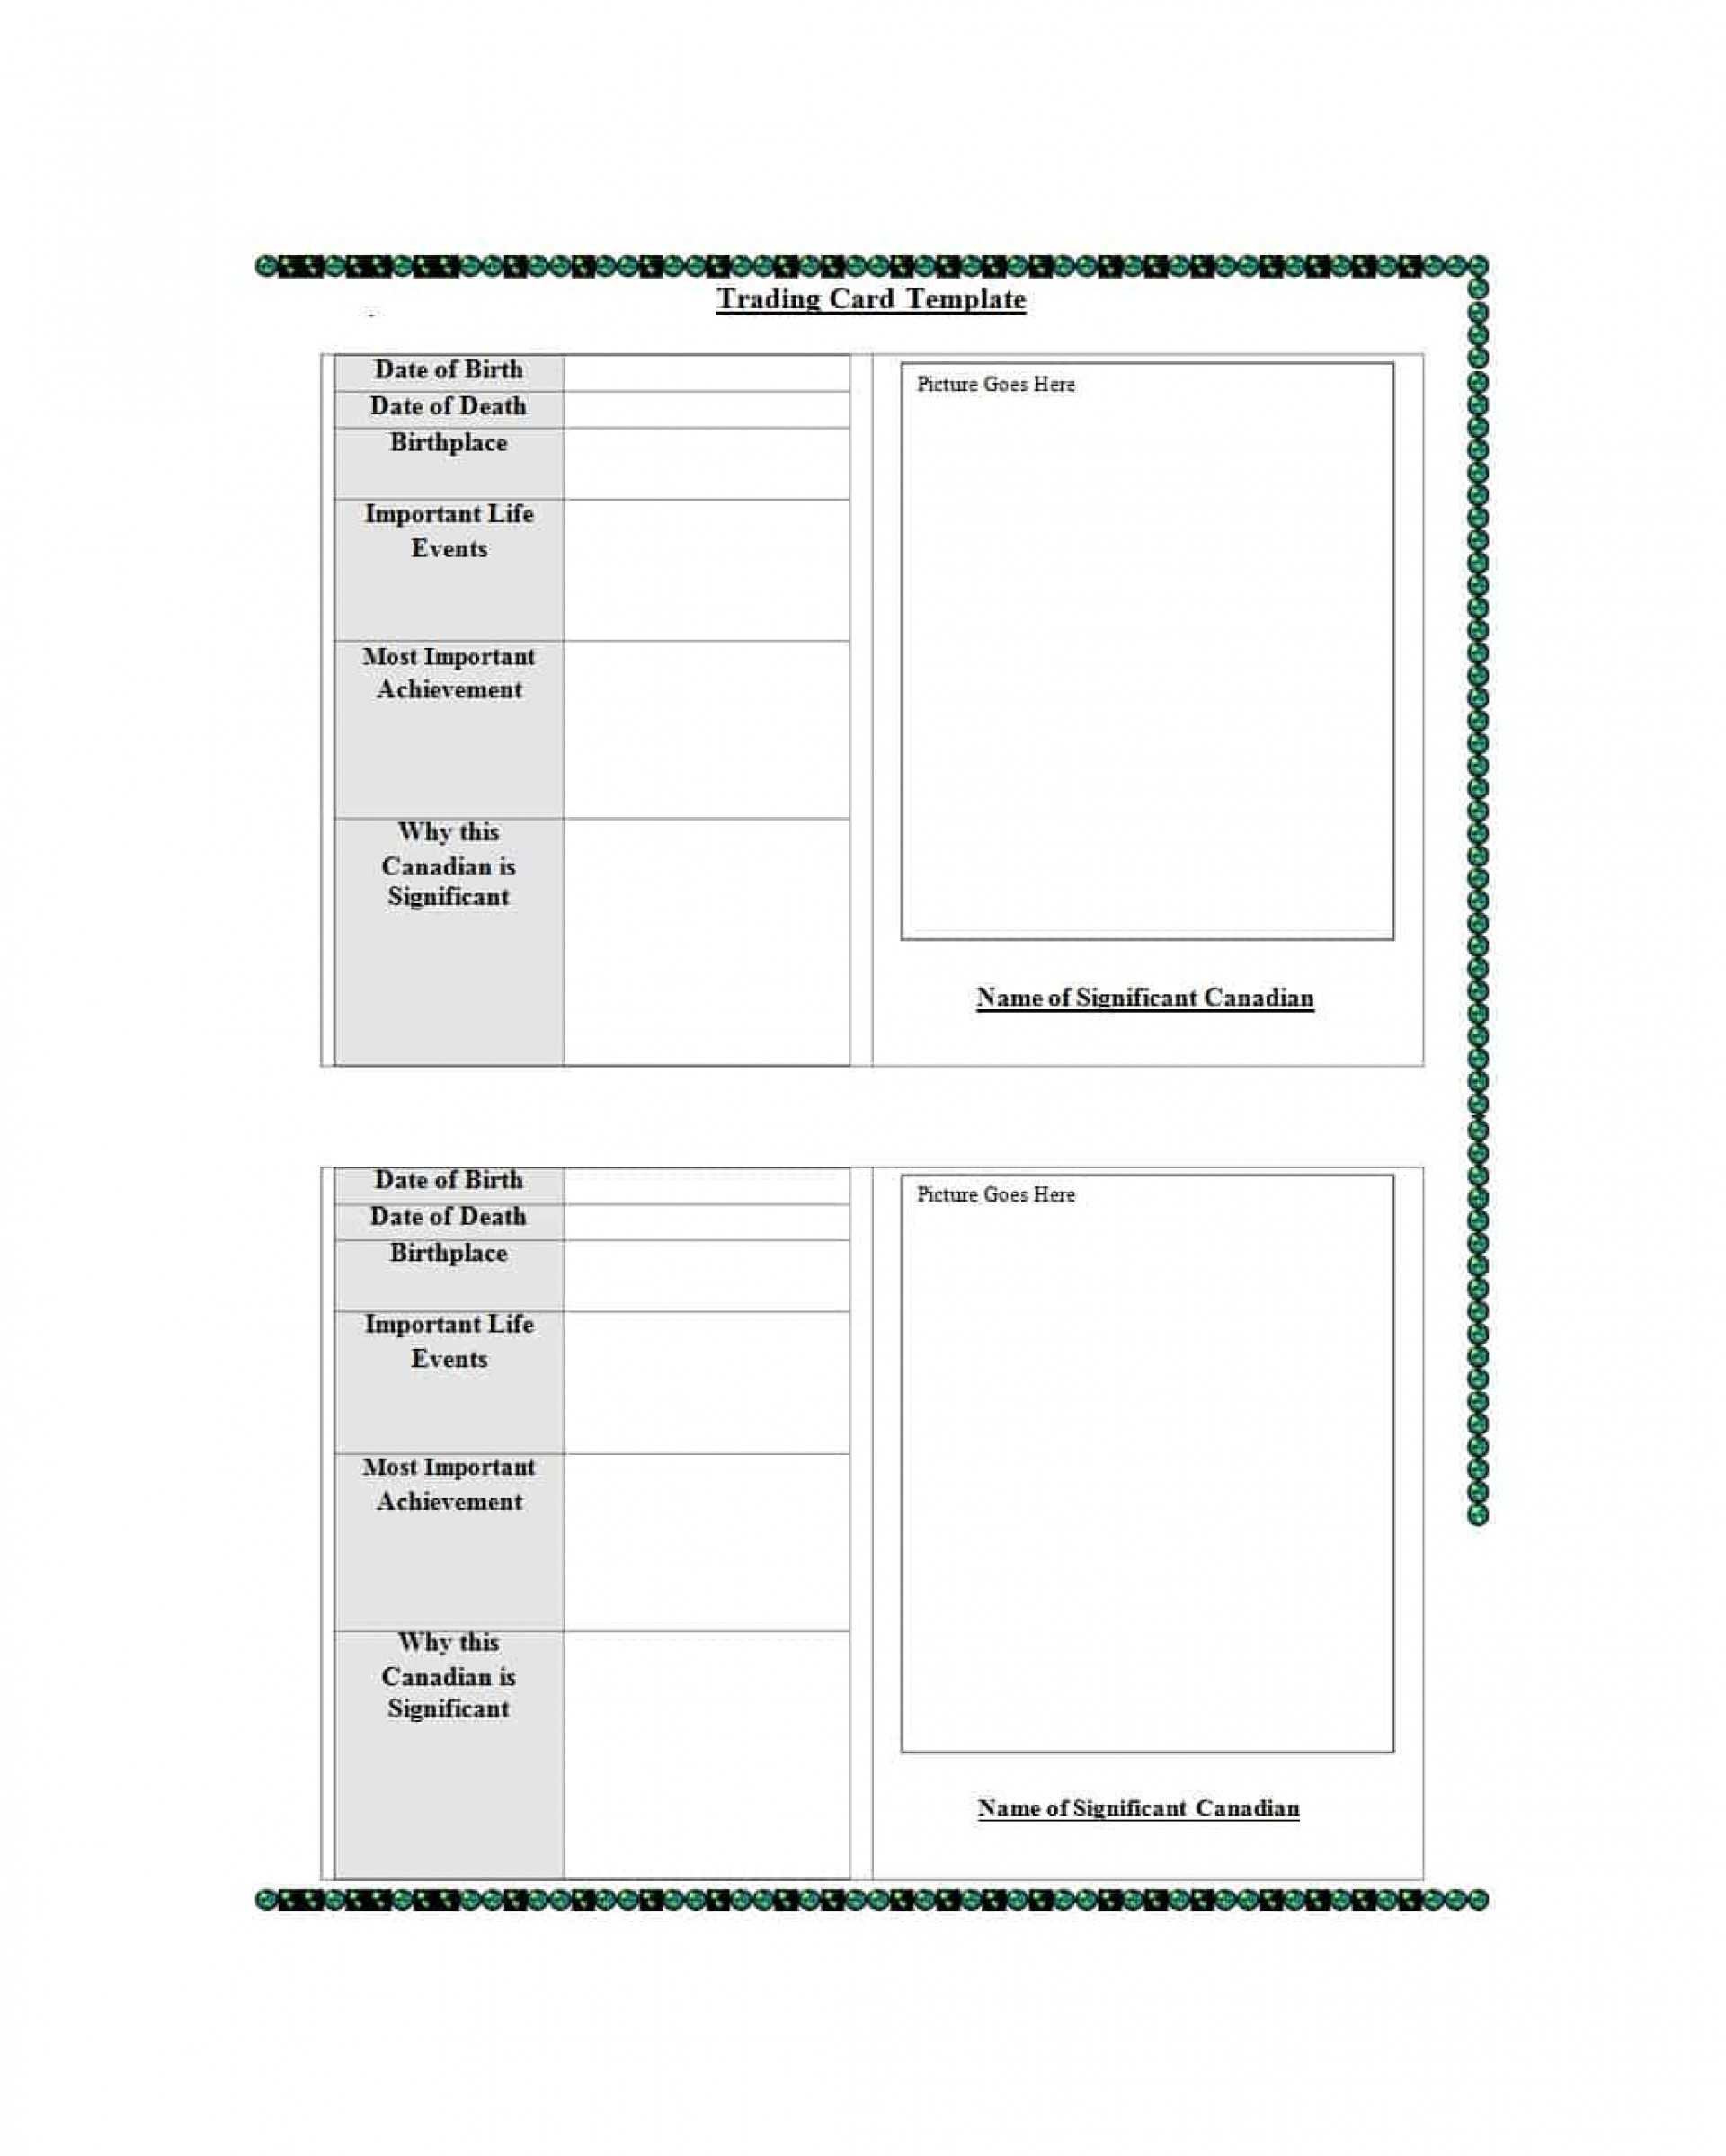 024 Baseball Trading Card Template Free Download Ideas In Free Trading Card Template Download